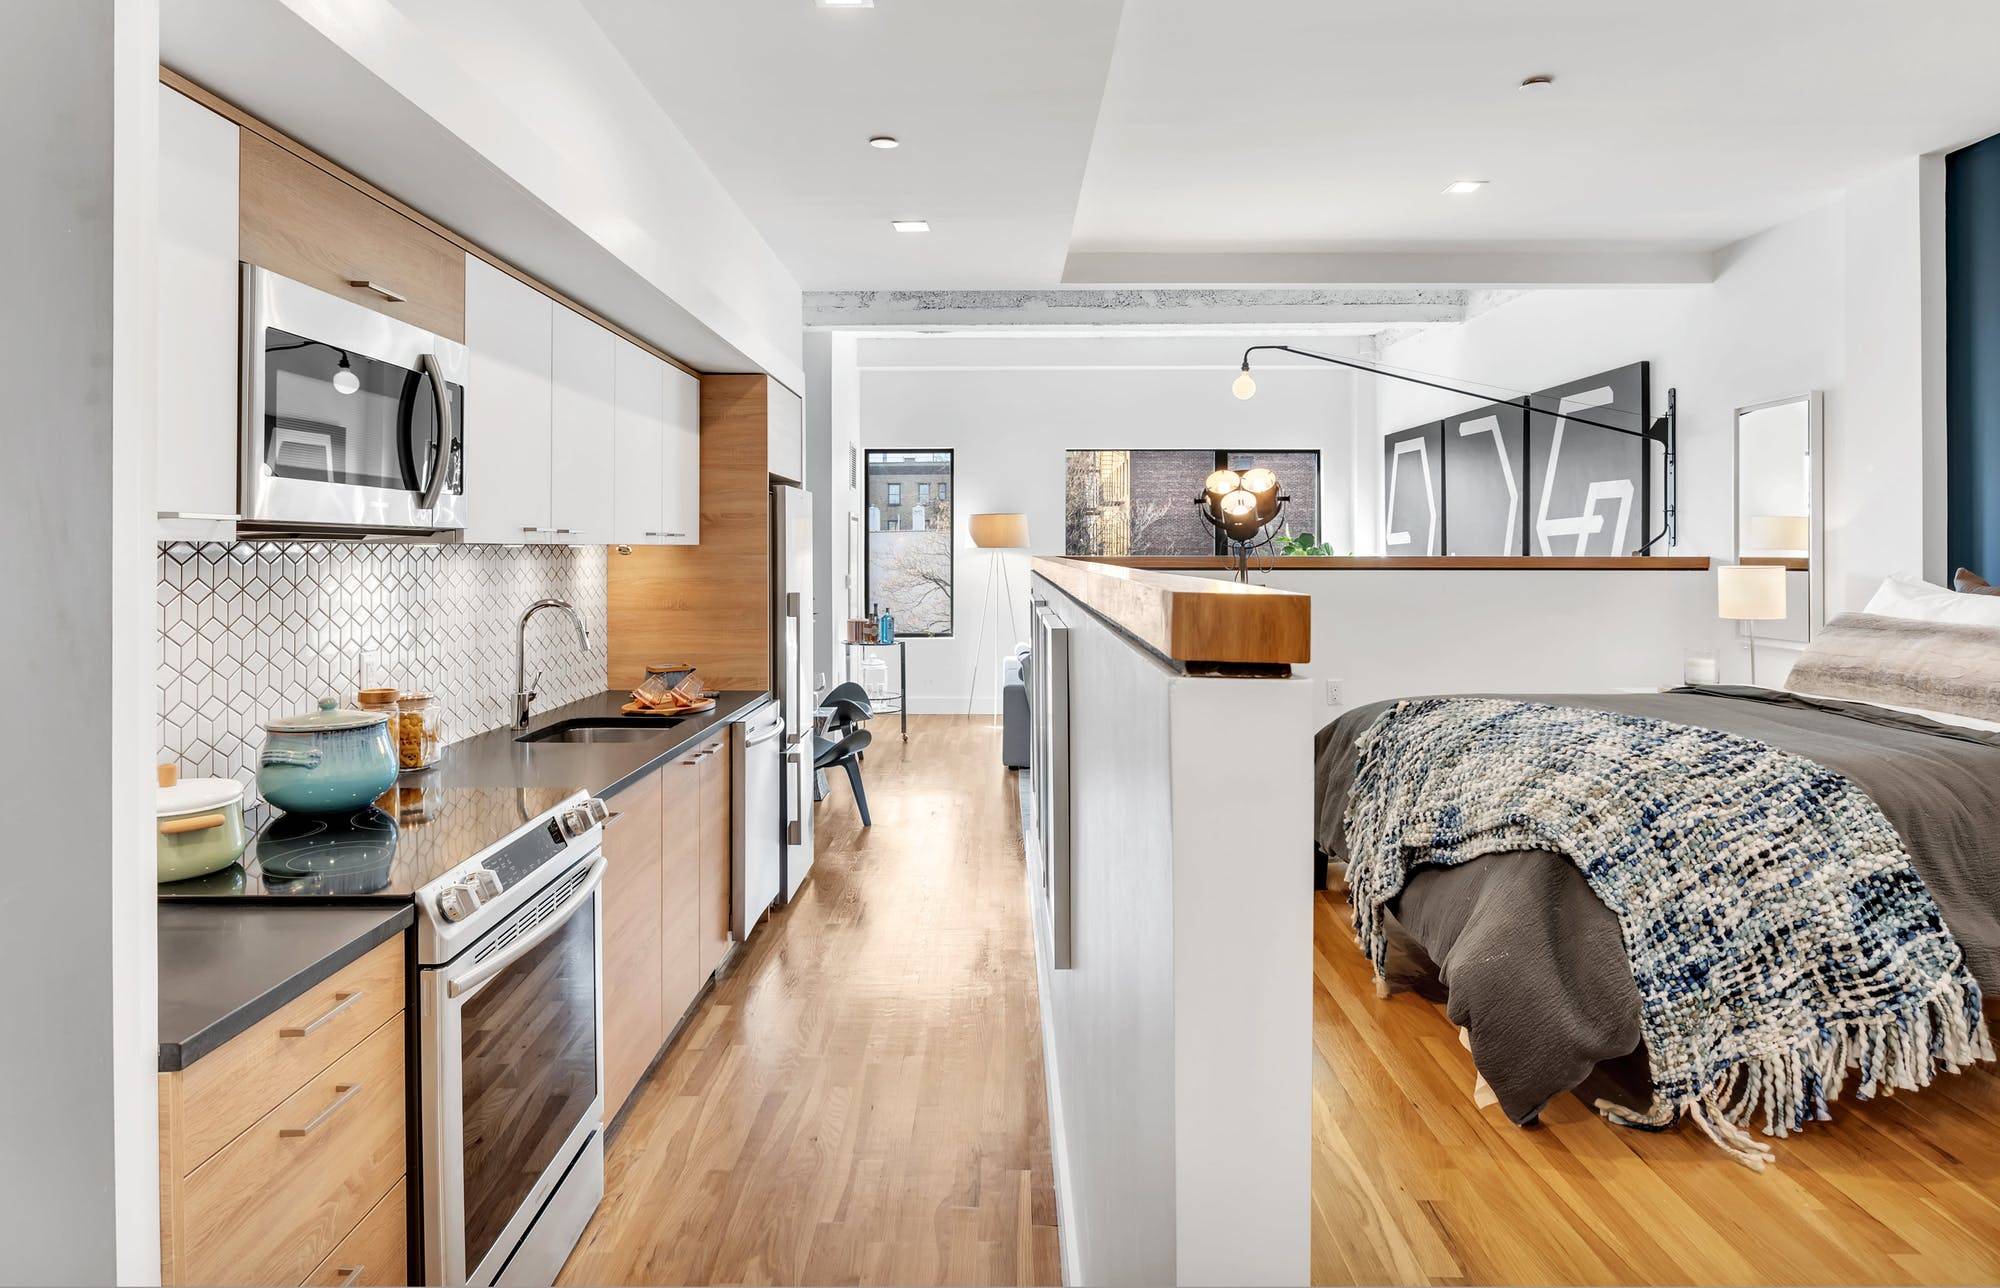 Prospect Park South's First Loft Building With Unique Loft Layouts and Luxurious Finishes !